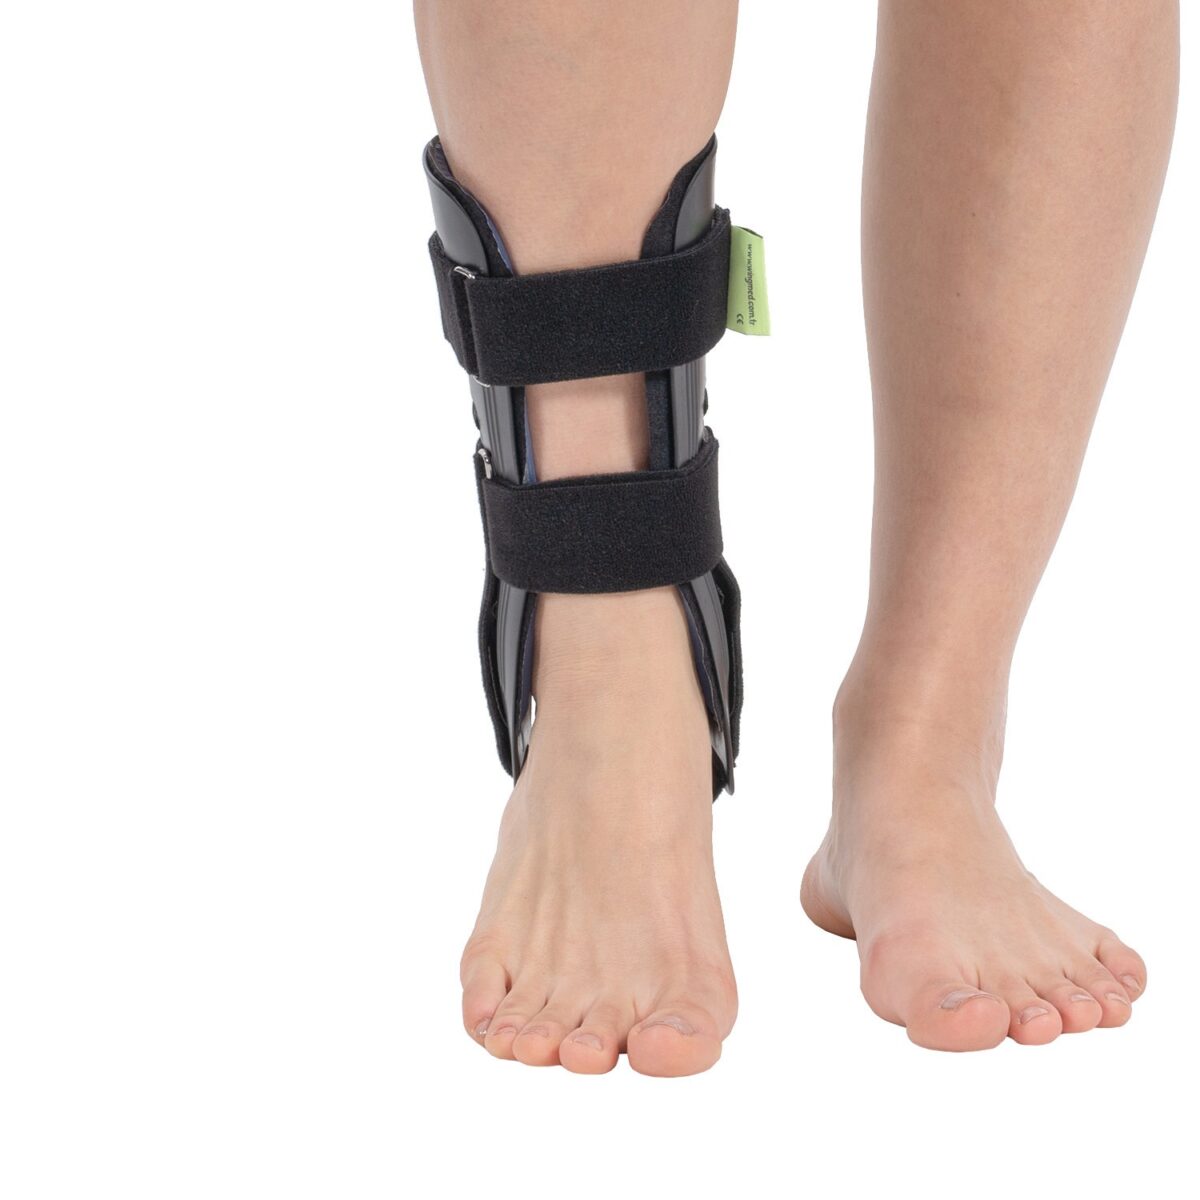 wingmed orthopedic equipments W616 ankle brace with gel pad 31 1 1